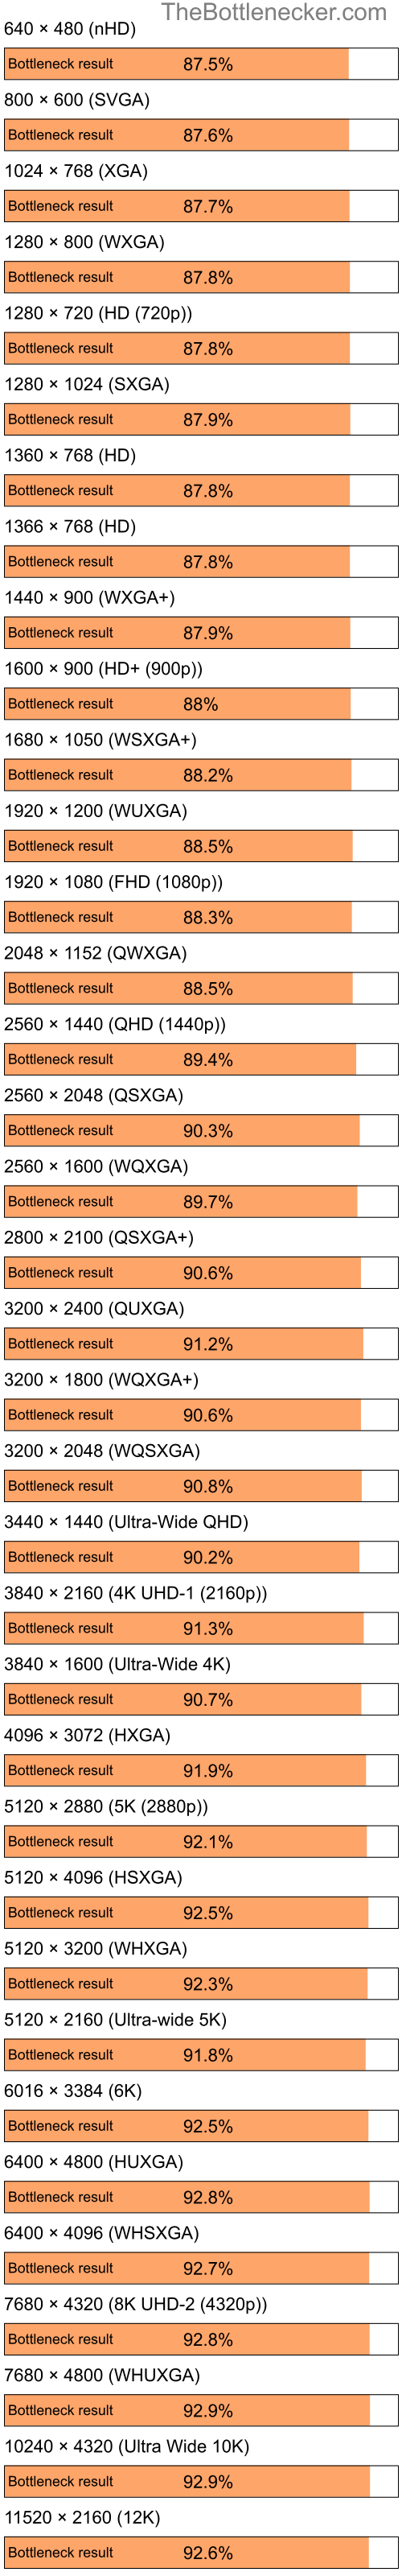 Bottleneck results by resolution for Intel Pentium 4 and NVIDIA GeForce4 MX 440 in Processor Intense Tasks